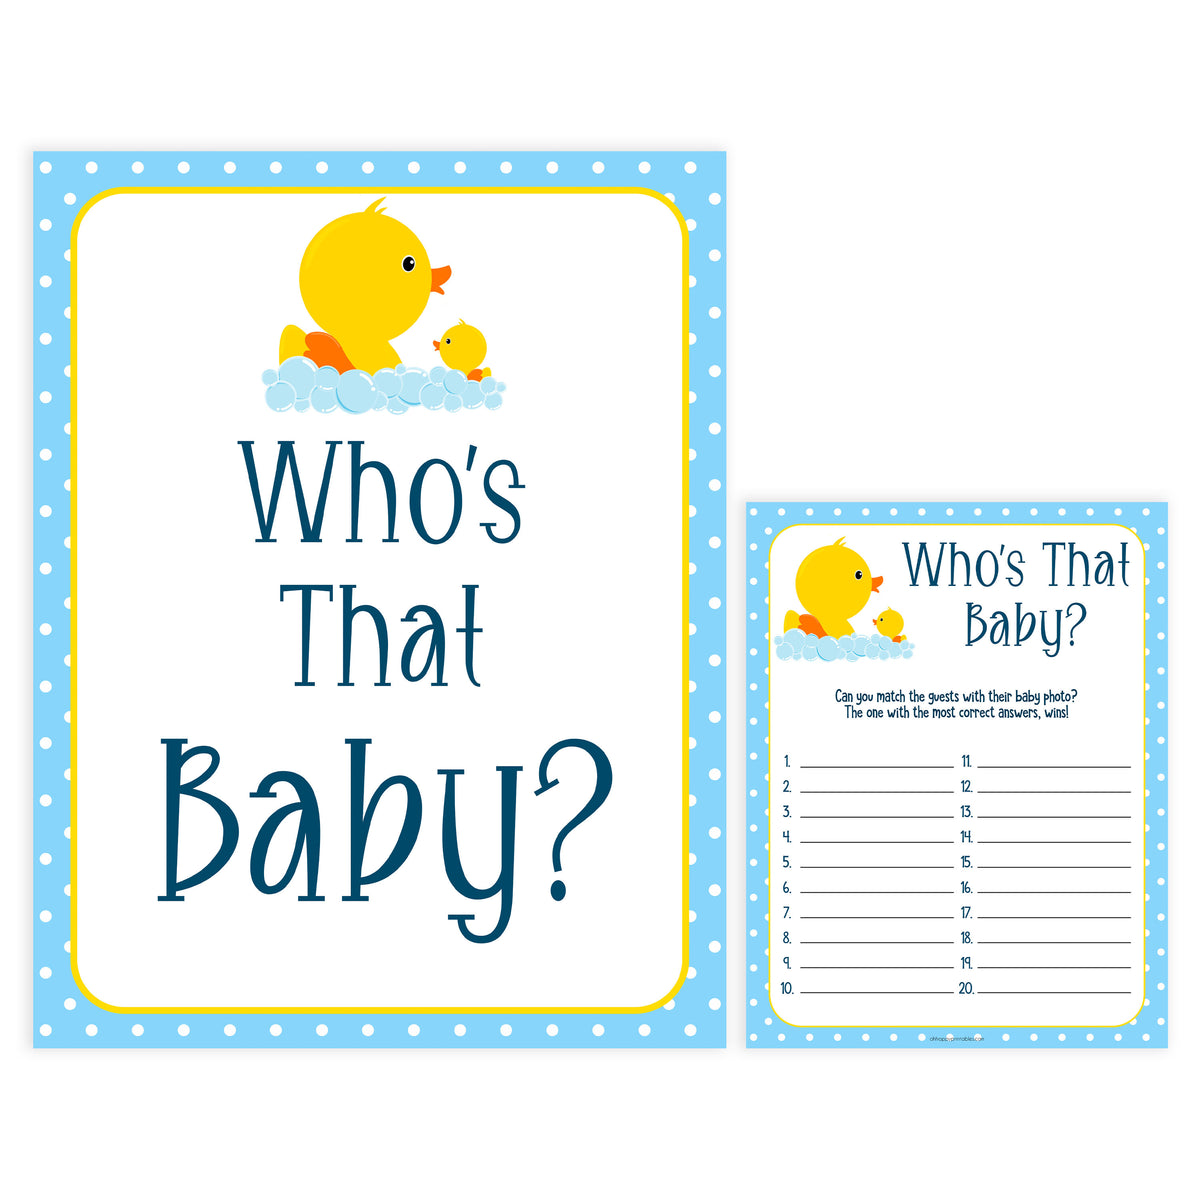 whos that baby baby game, rubber ducky baby shower game, printable baby games, fun baby shower games, top baby games